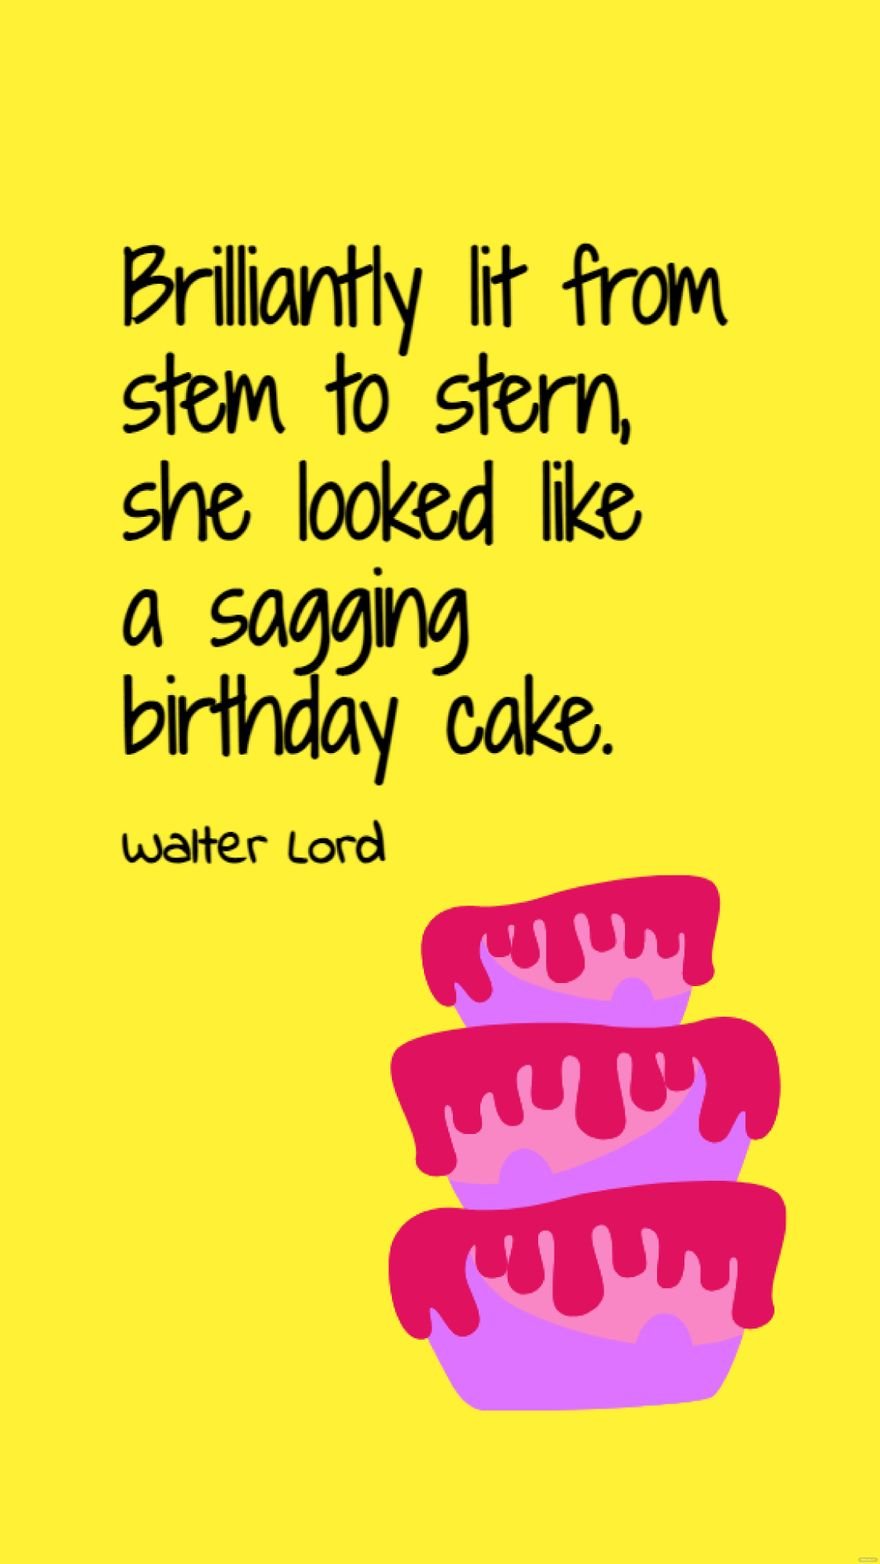 Walter Lord Birthday Quote - Brilliantly lit from stem to stern, she looked  like a sagging birthday cake. 